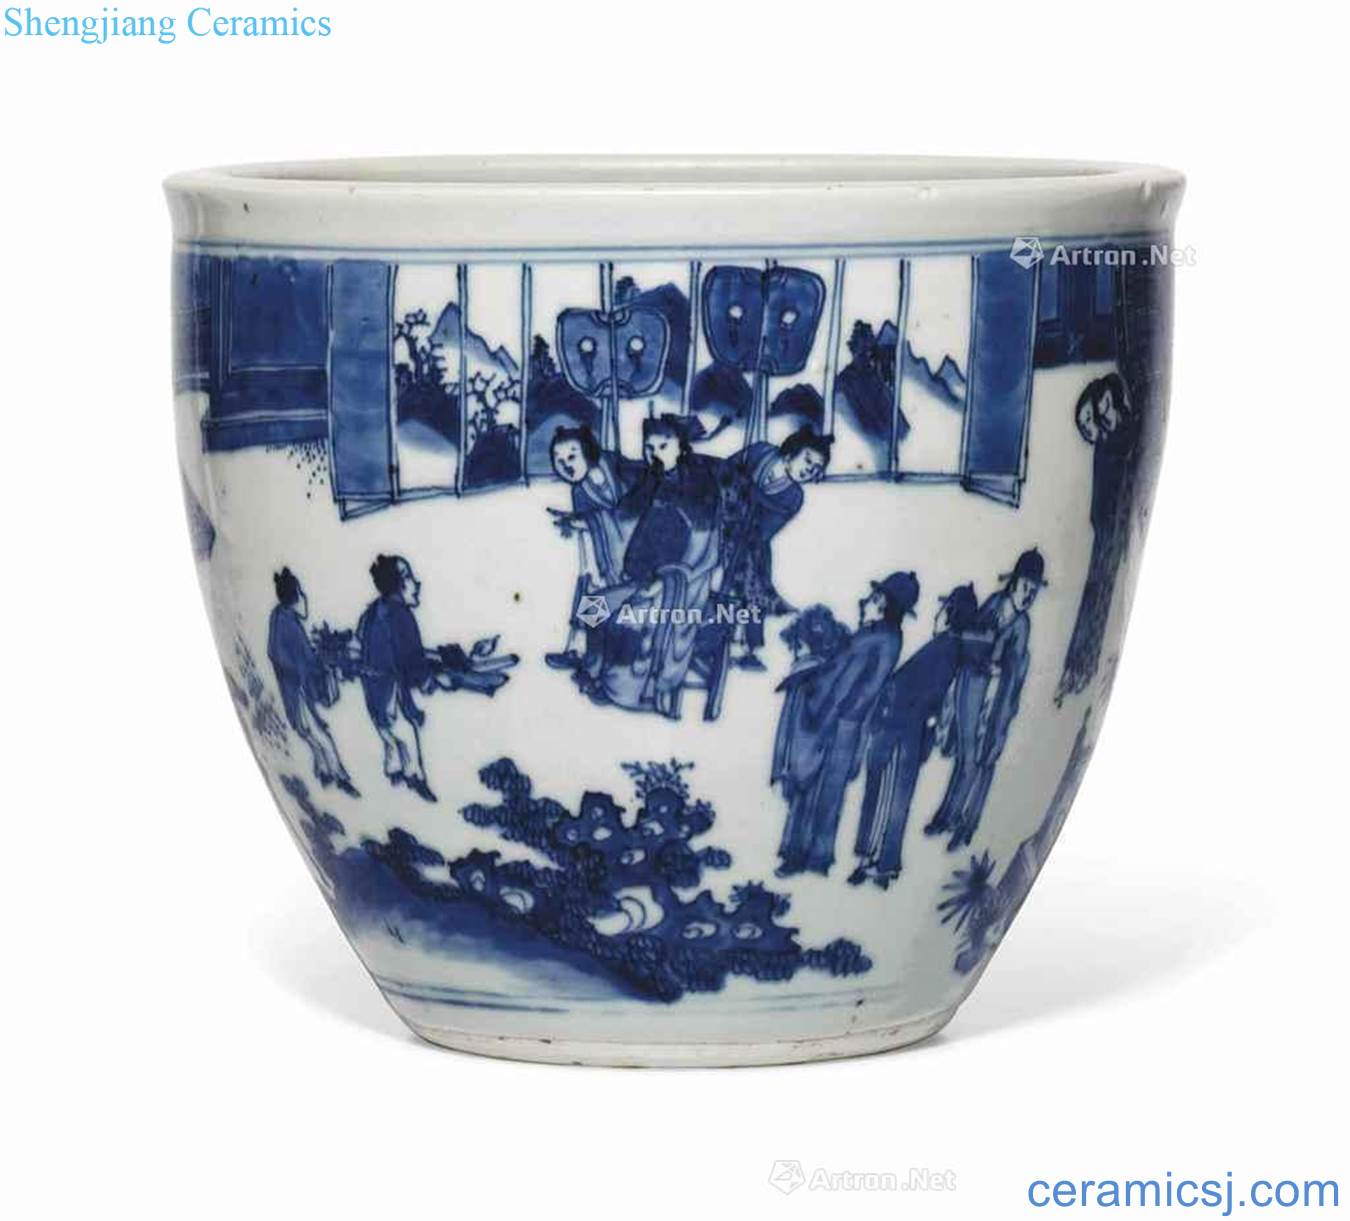 In the 17th century A BLUE AND WHITE JARDINIERE